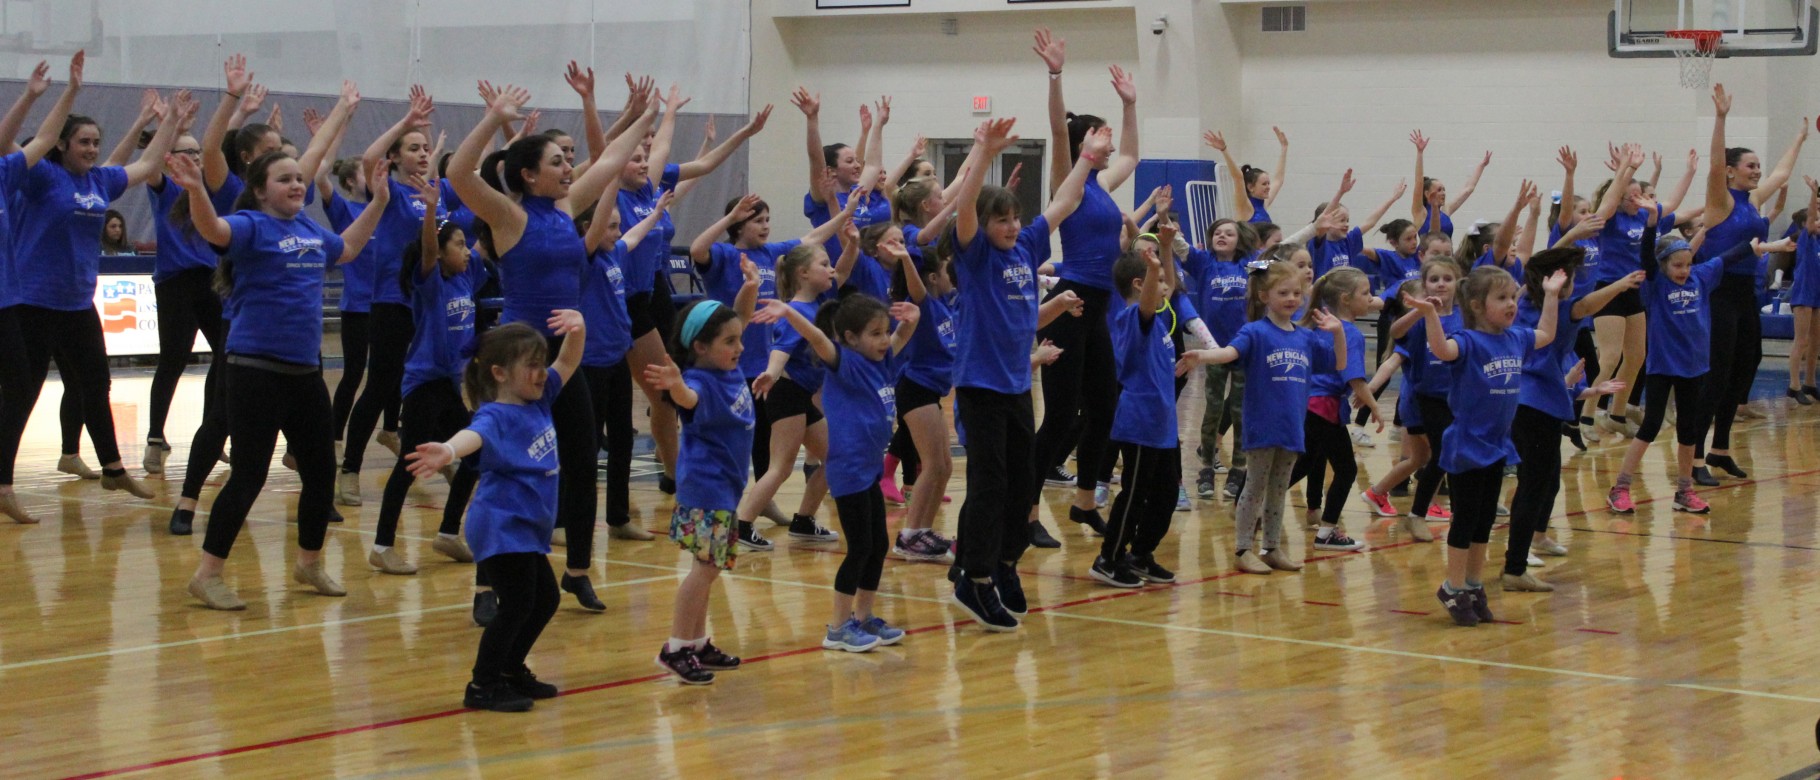 Sixty children between the ages of 5 and 18 years participated in UNE's first Dance Clinic and performed during halftime at a UN